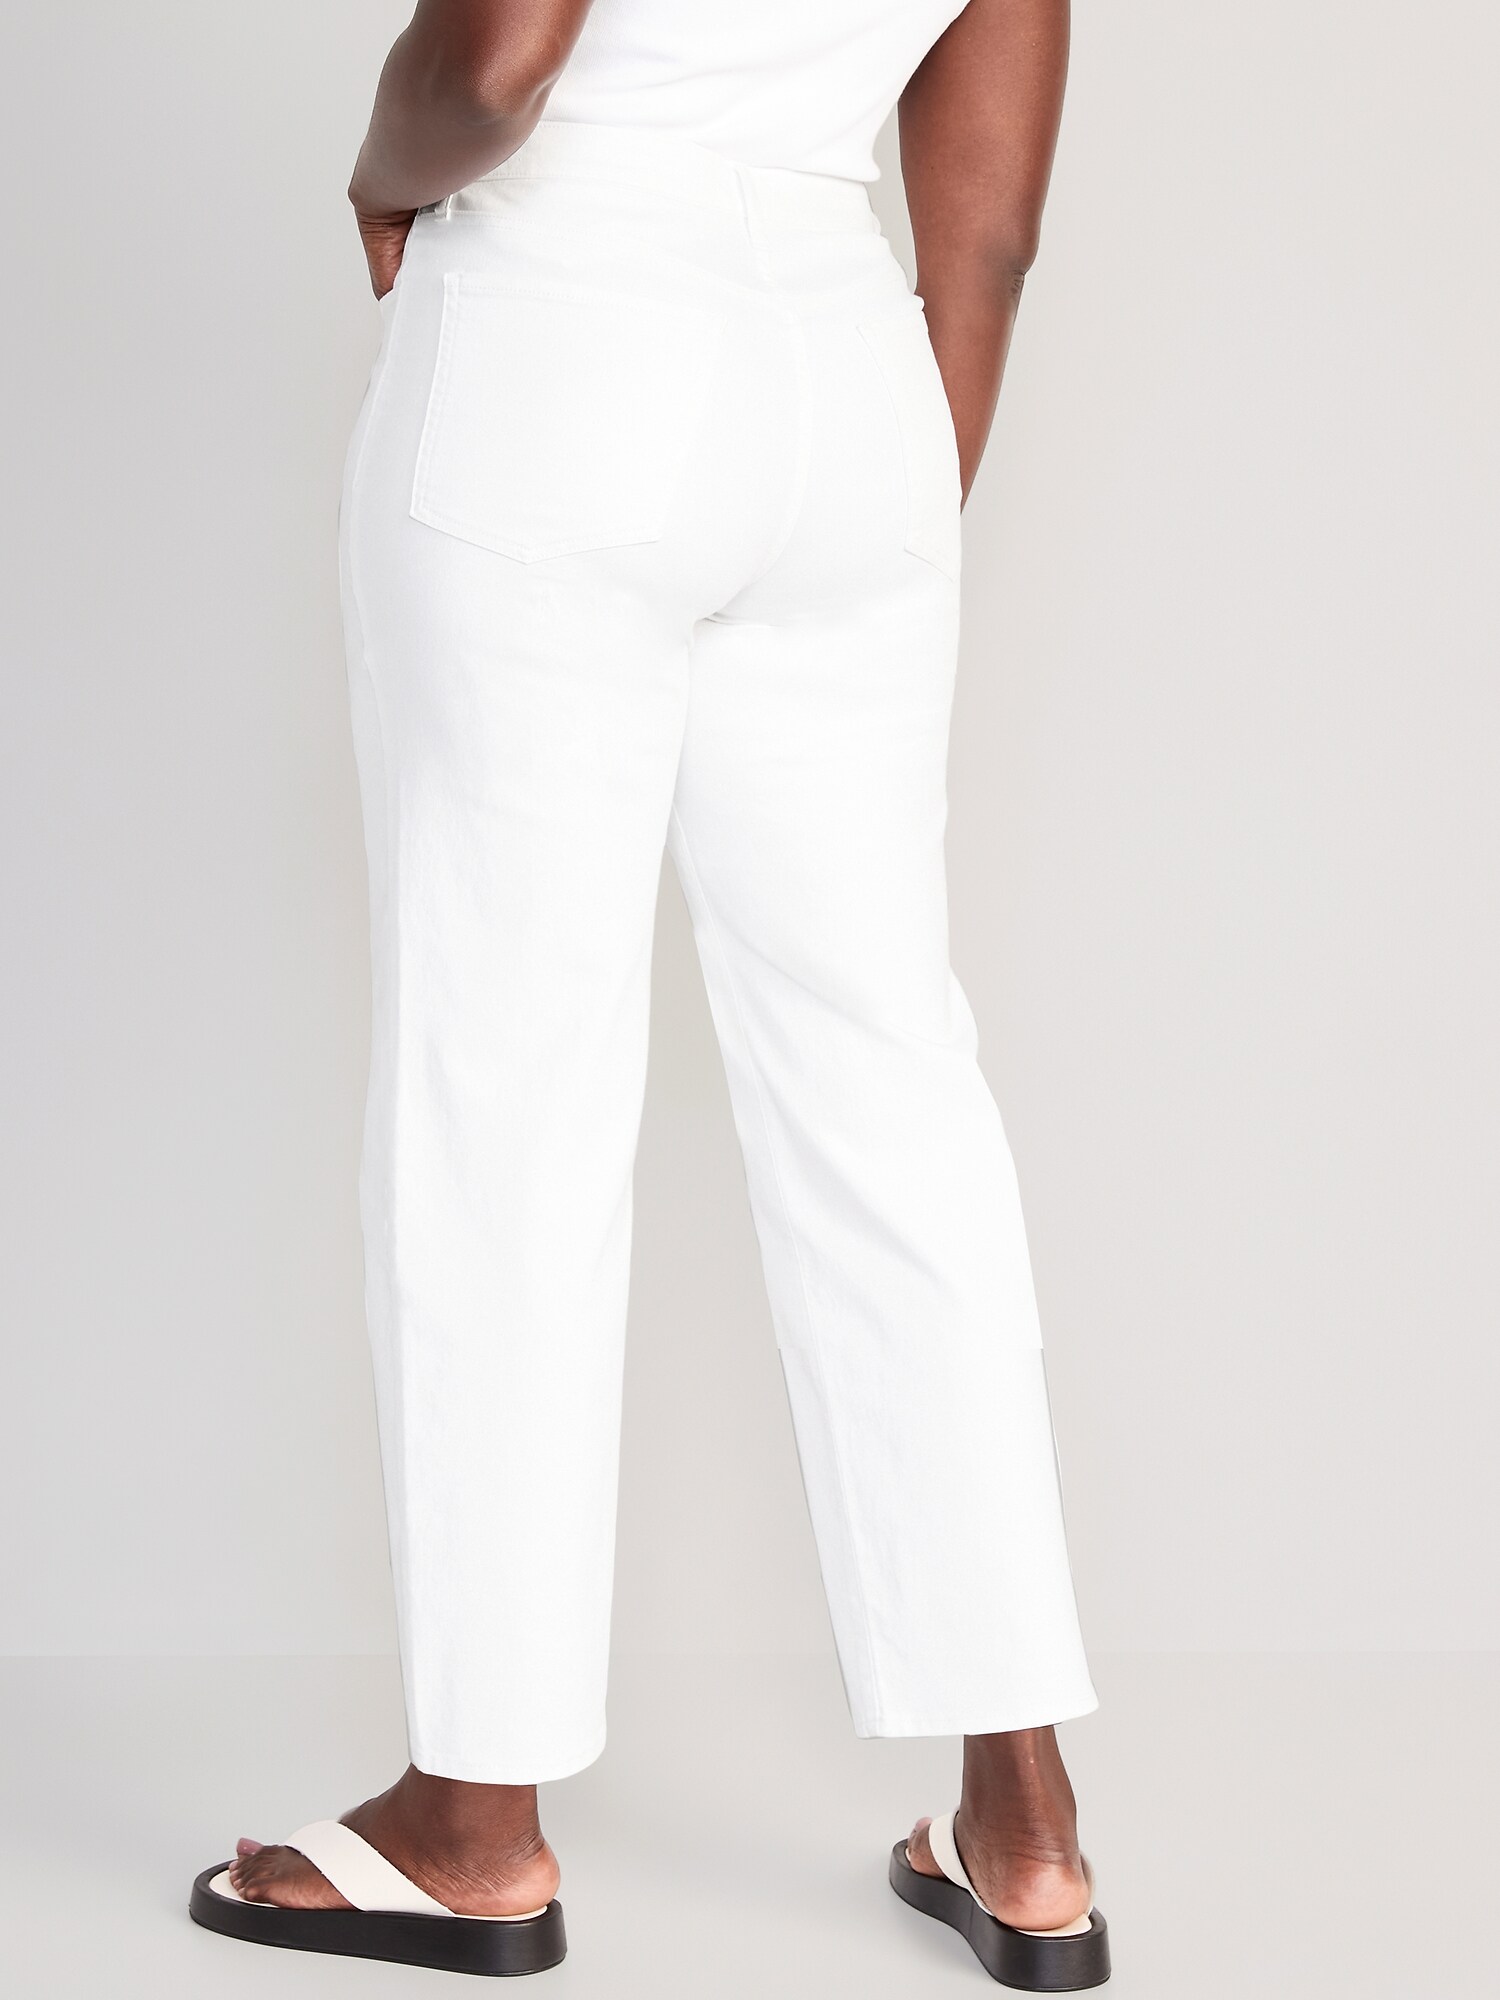 High-Waisted Wow White Loose Jeans for Women | Old Navy